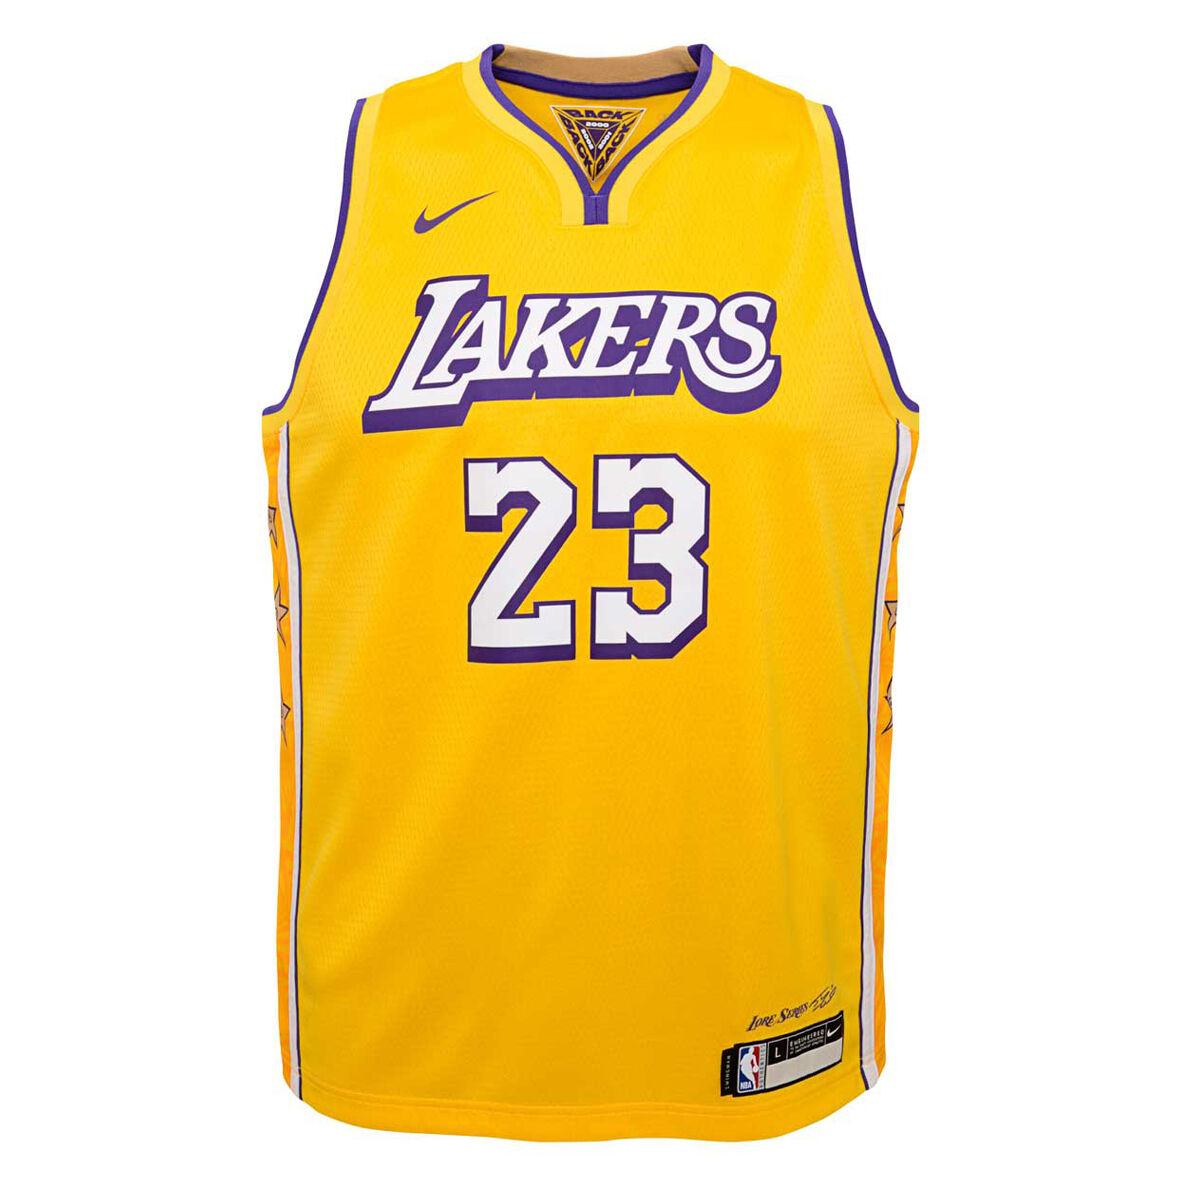 lebron james jersey youth size